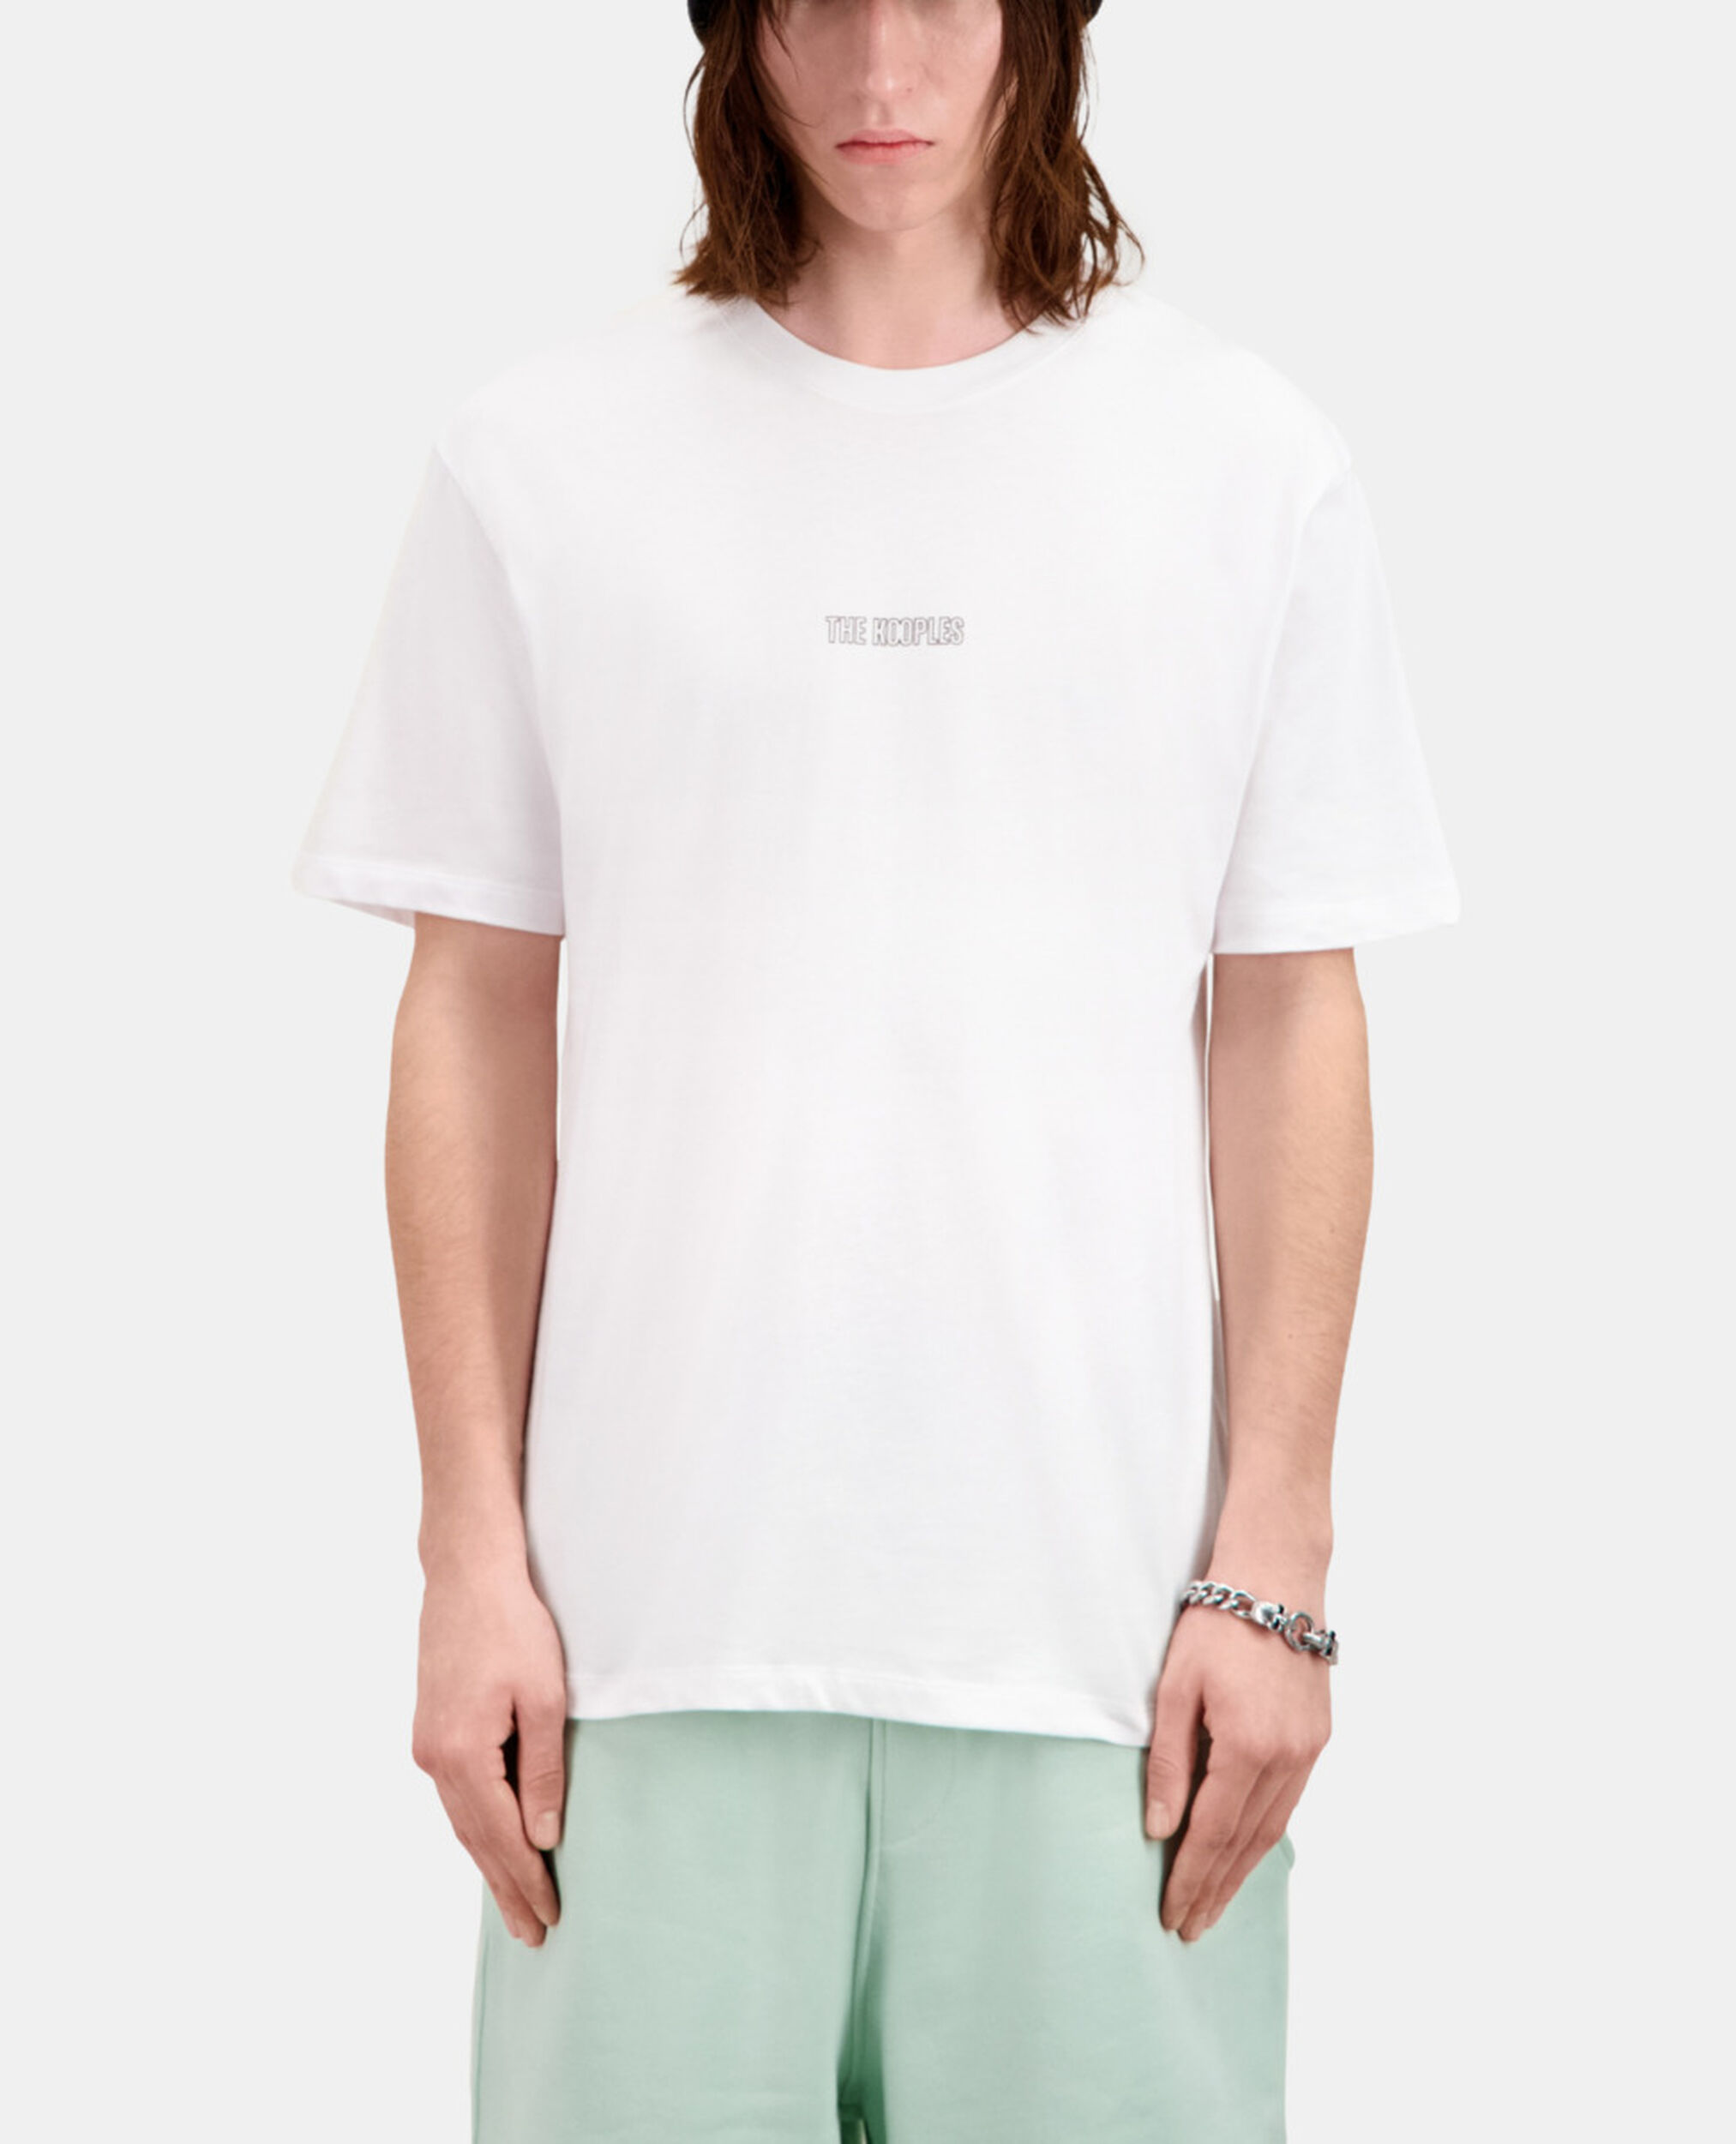 Men's white t-shirt with logo, WHITE, hi-res image number null